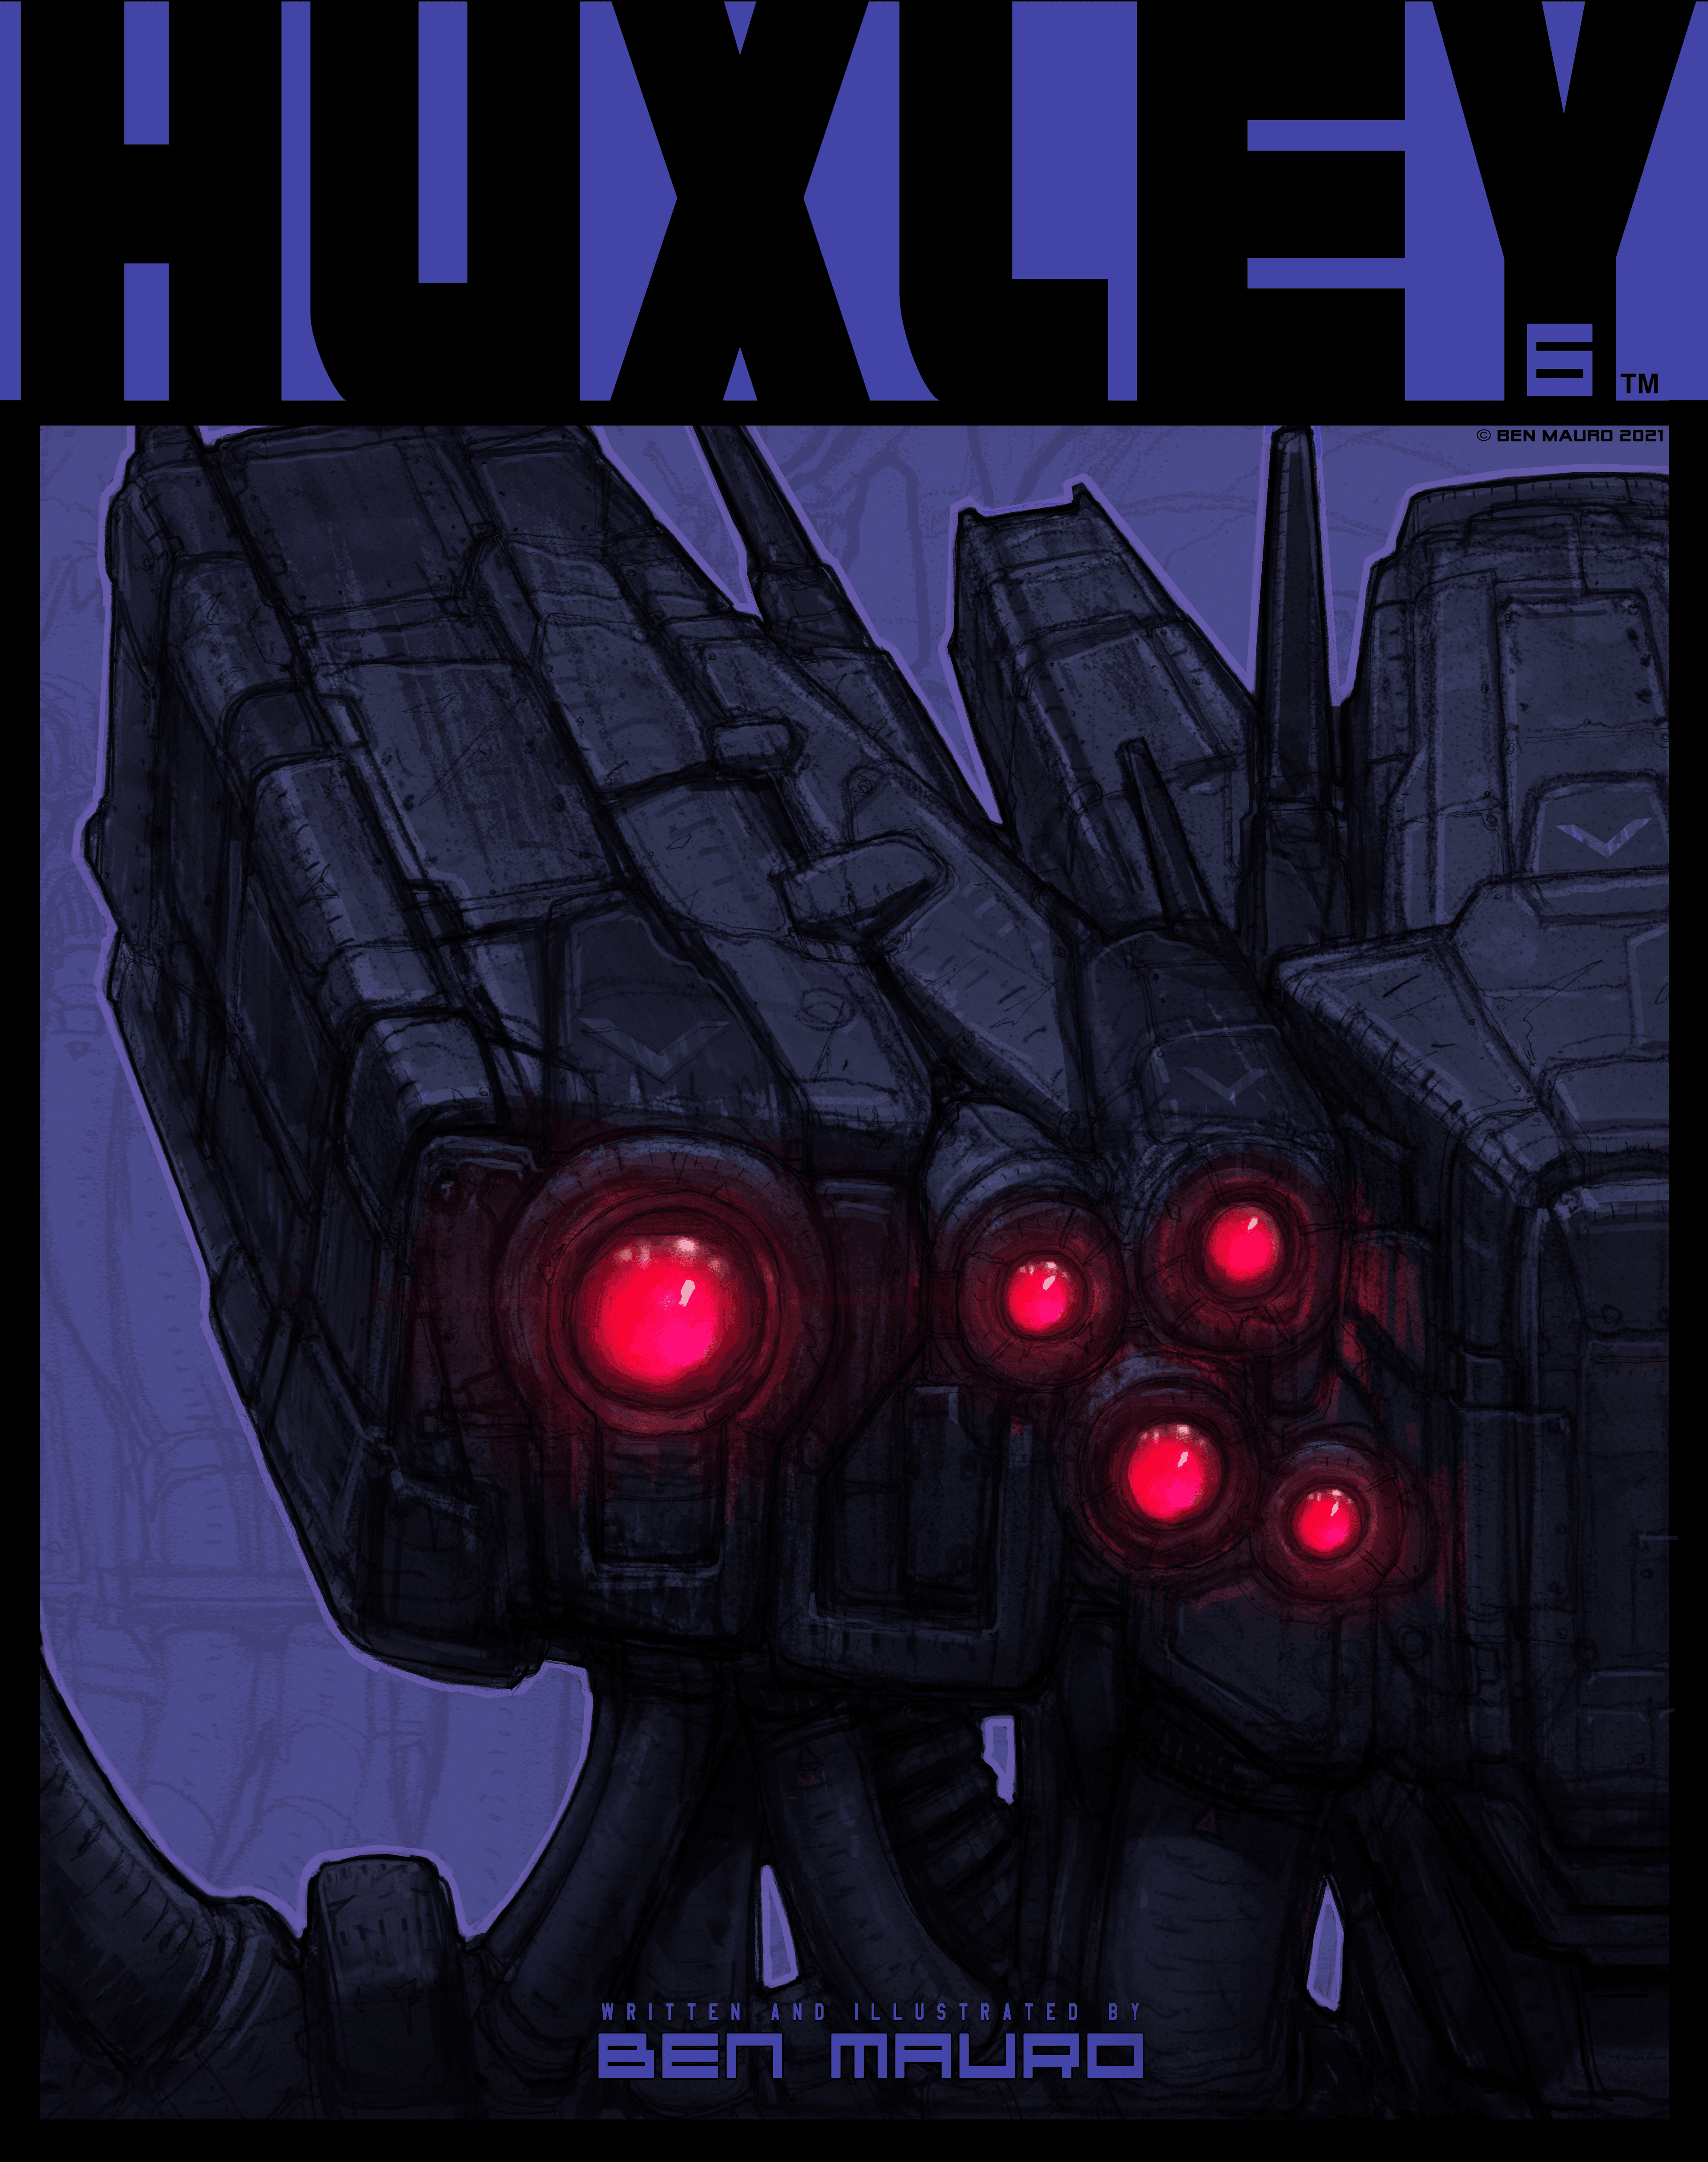 HUXLEY Comic: Issue 6 - First Edition - #824